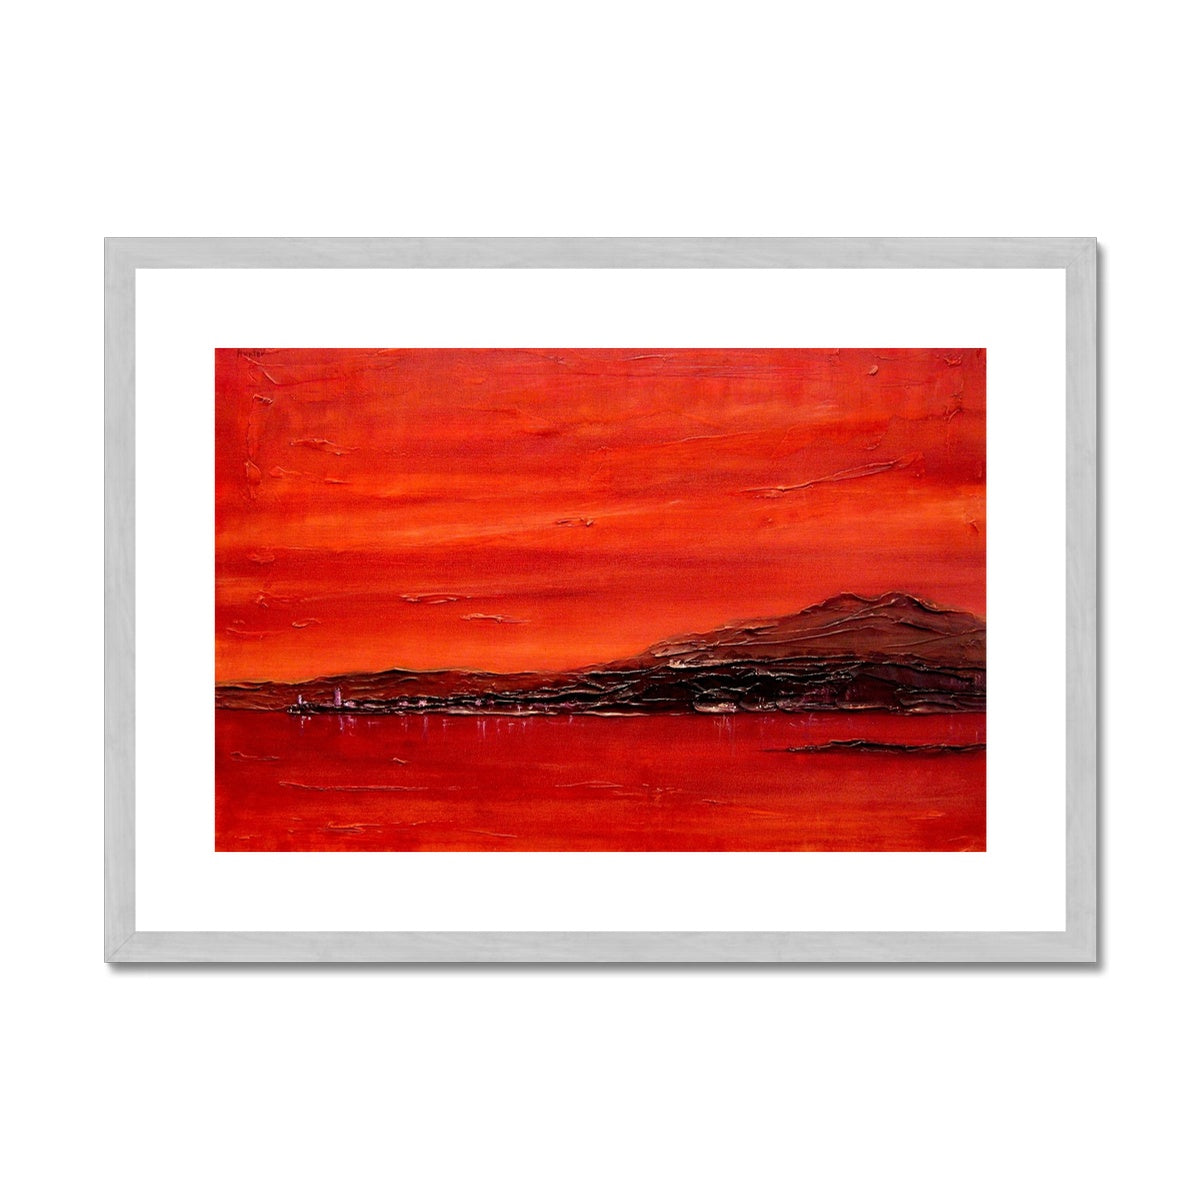 Toward Point Lighthouse Sunset Painting | Antique Framed & Mounted Prints From Scotland-Antique Framed & Mounted Prints-Arran Art Gallery-A2 Landscape-Silver Frame-Paintings, Prints, Homeware, Art Gifts From Scotland By Scottish Artist Kevin Hunter